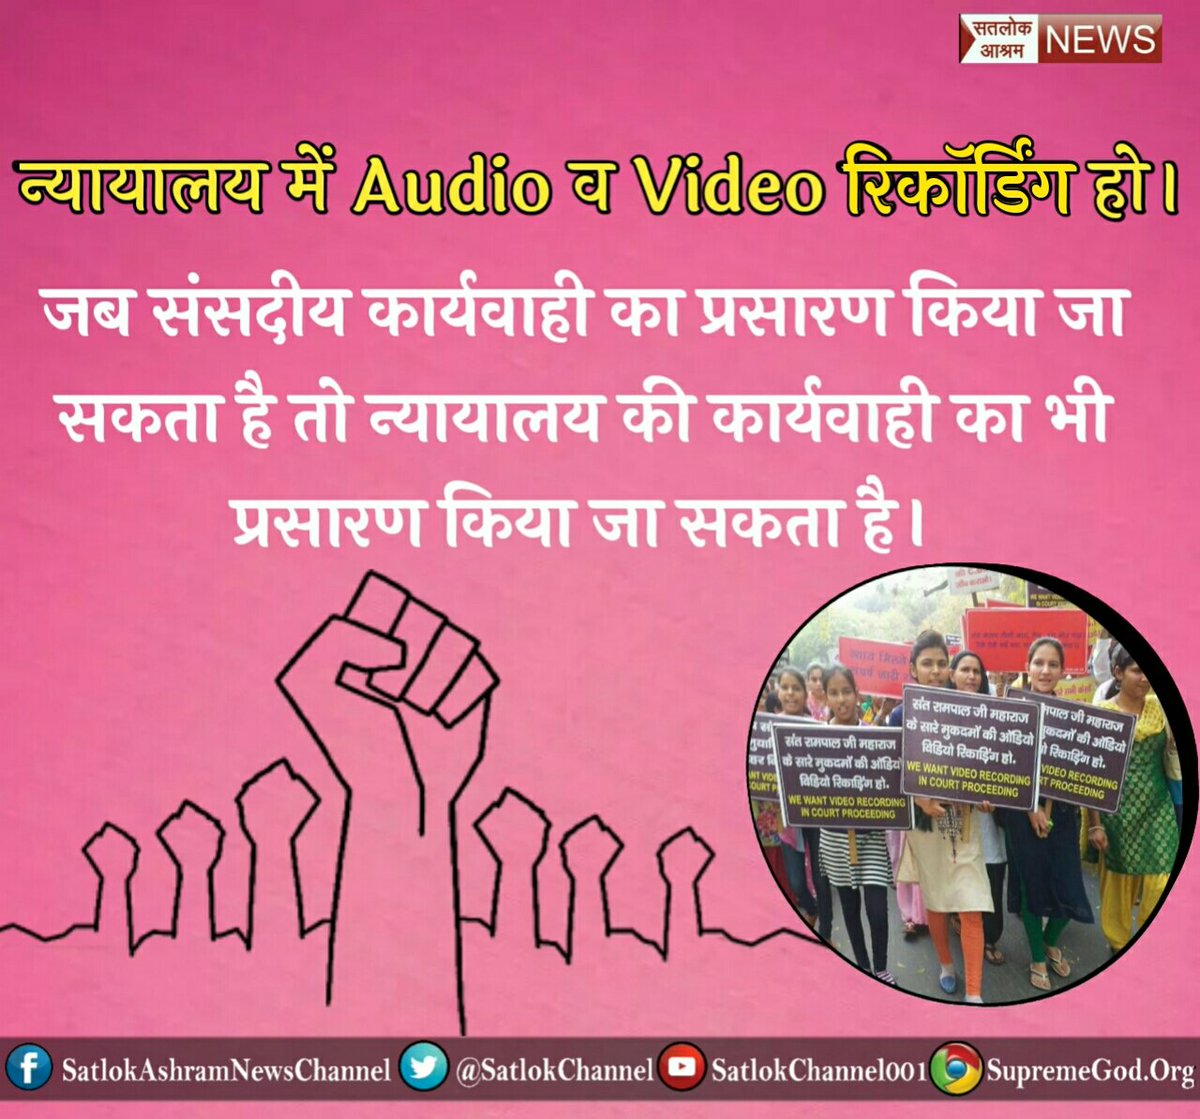 Nowadays you are seeing that there are video records in government schools which can be explored what teachers are doing. In the same way, In favor of India Rising and digital india #IndiaWants_AVRecording_InCourts proceedings.
#Navratri 
#JungleRaj_In_Haryana